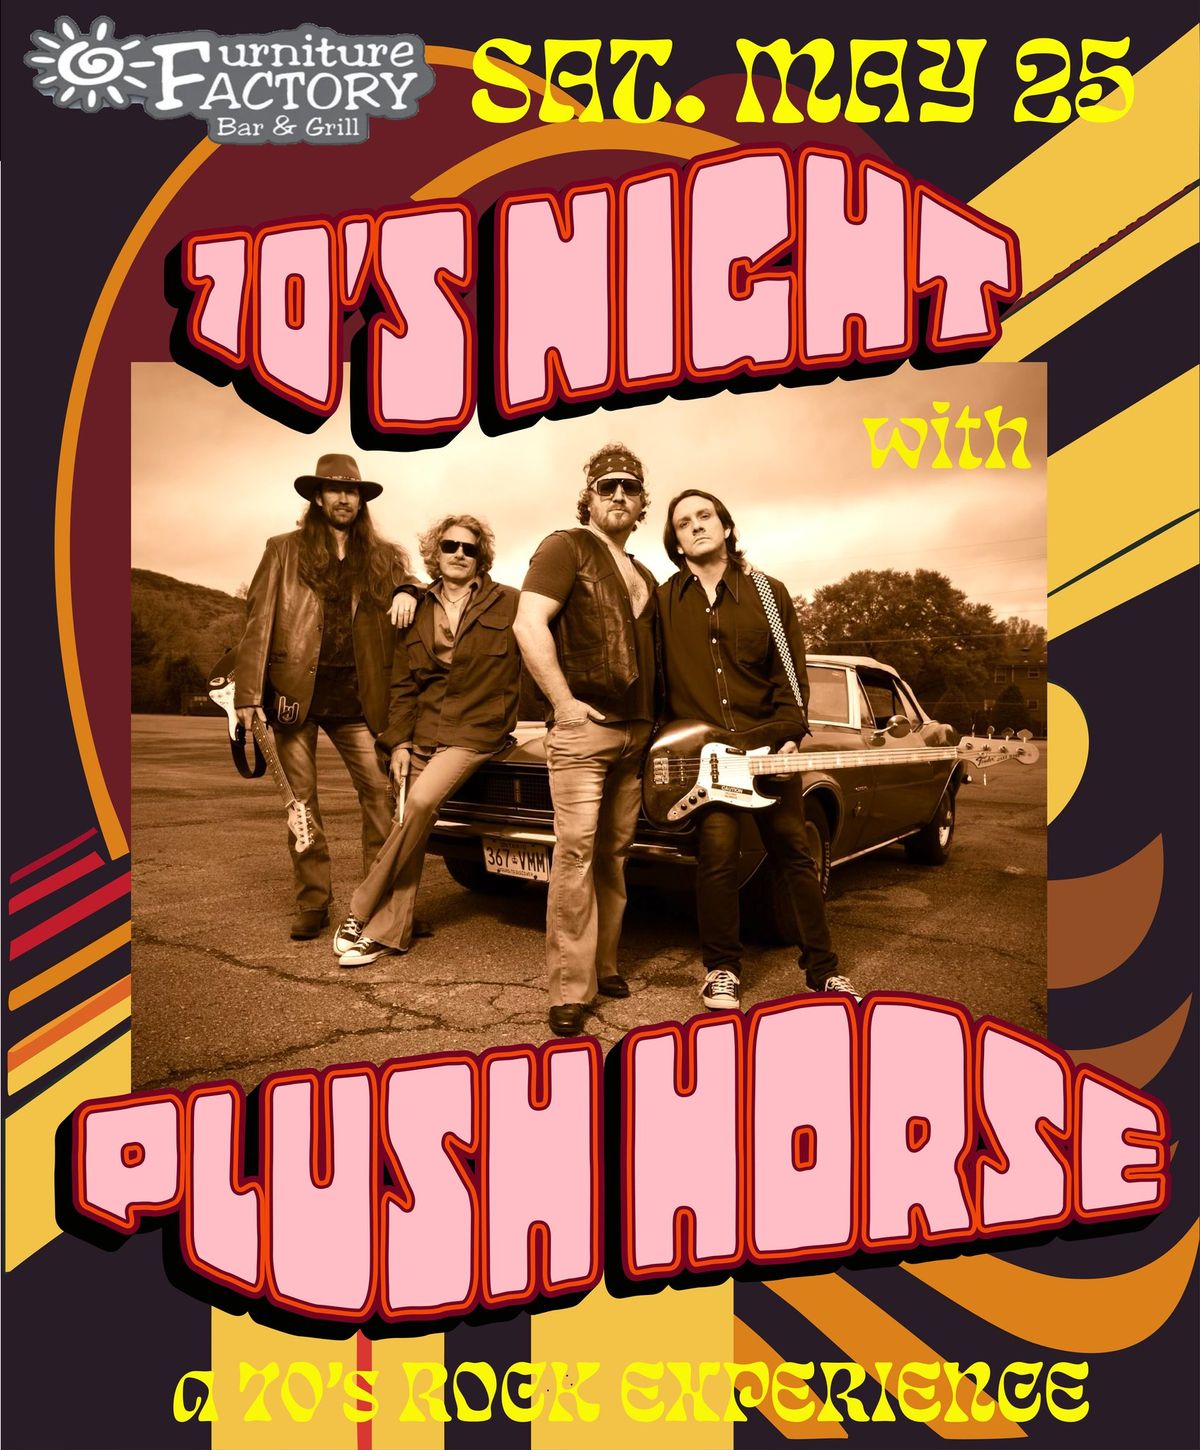 PlushHorse 70s Rock Experience - FREE: NO COVER CHARGE!